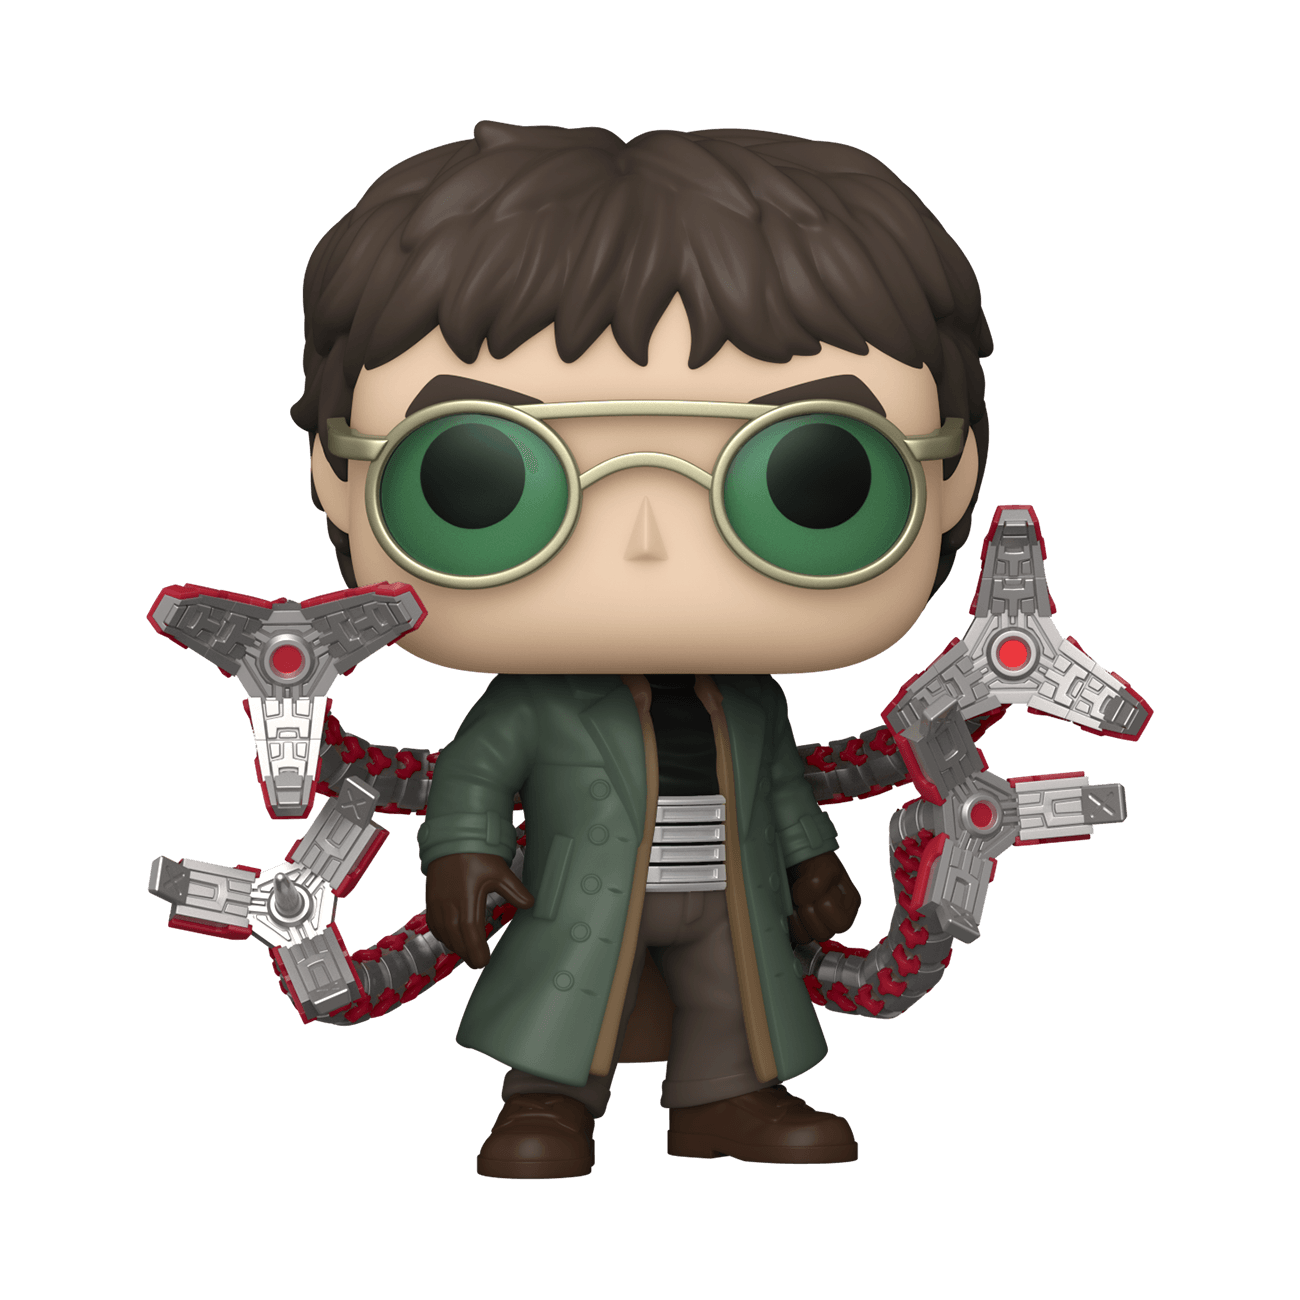 Funko Doc Ock - Spider-Man No Way Home - BumbleToys - 18+, Action Figures, Avengers, Boys, Characters, Funko, Pre-Order, Spider man, Spiderman